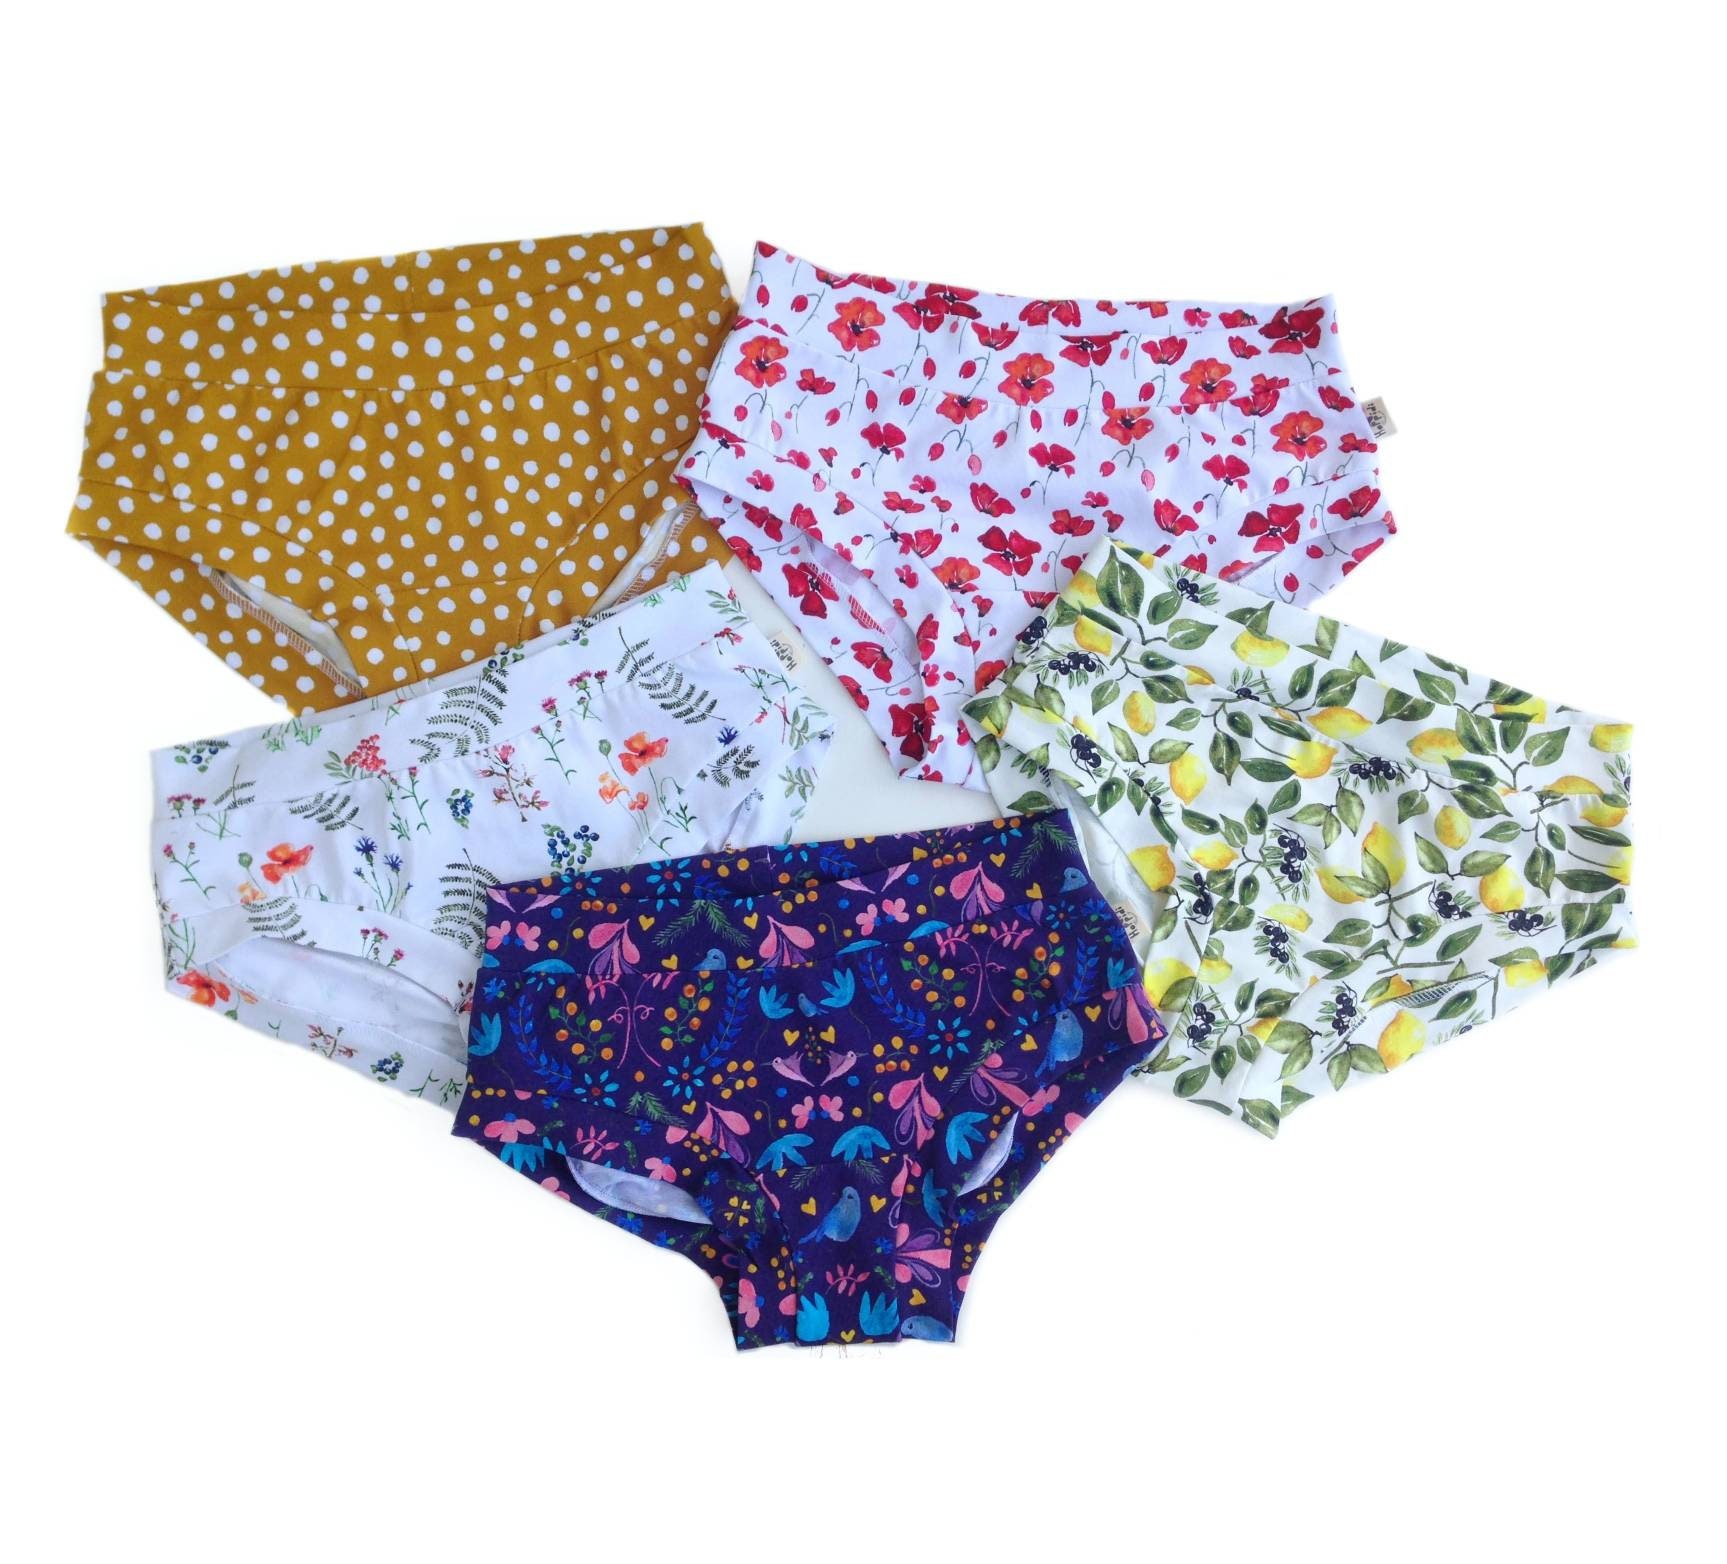 Buy Women's Elastic Free Underwear Boyleg and Brief Style, Multi Pack  Surprise Package, Comfortable Colorful Organic Cotton Teenager Underpants  Online in India 